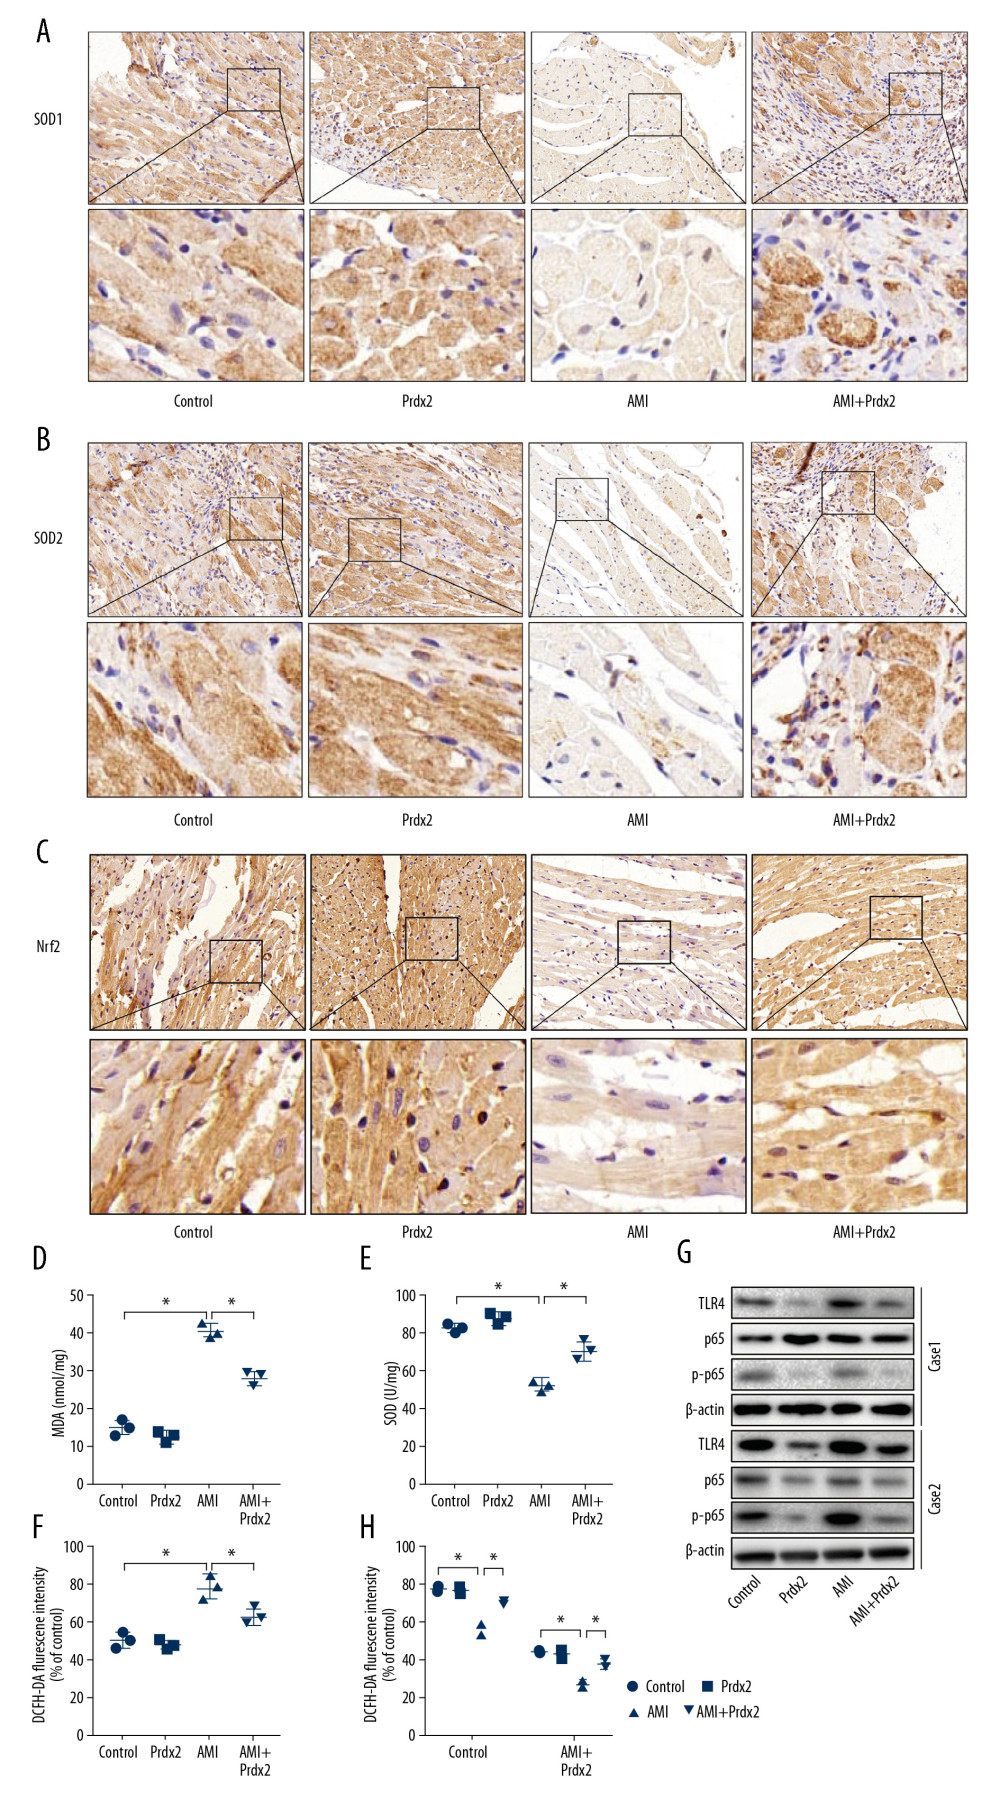 Prdx2 recombinant protein reduces myocardial oxidative stress in AMI rats. (A–C) IHC staining results of SOD1/2 and Nrf2 in rat myocardial tissue (n=3) (magnification: 200×); (D, E) ELISA results of MDA and SOD (n=3); (F) ROS level of rat myocardial tissue (n=3); (G) Western blot results of SOD1 and SOD2 (n=3); (H) EF and FS results of cardiac function (n=3). (“*” means the difference between the 2 groups was statistically significant and P<0.05).